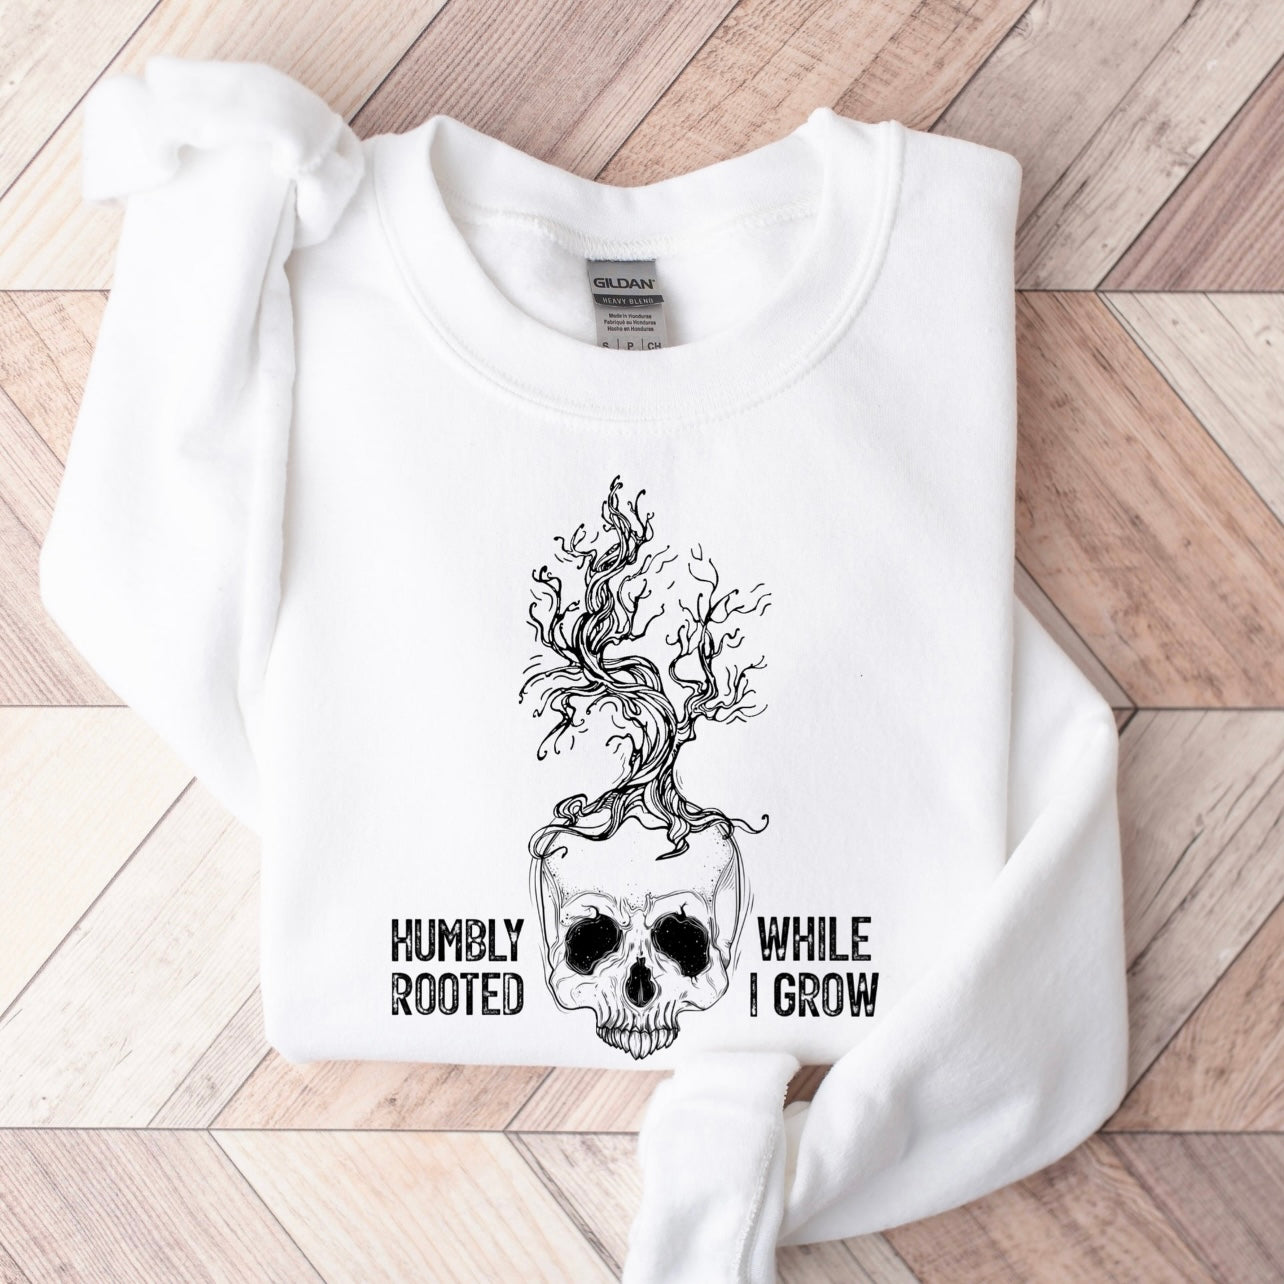 Humbly Rooted While I Grow Tee or Sweatshirt - Bella Lia Boutique